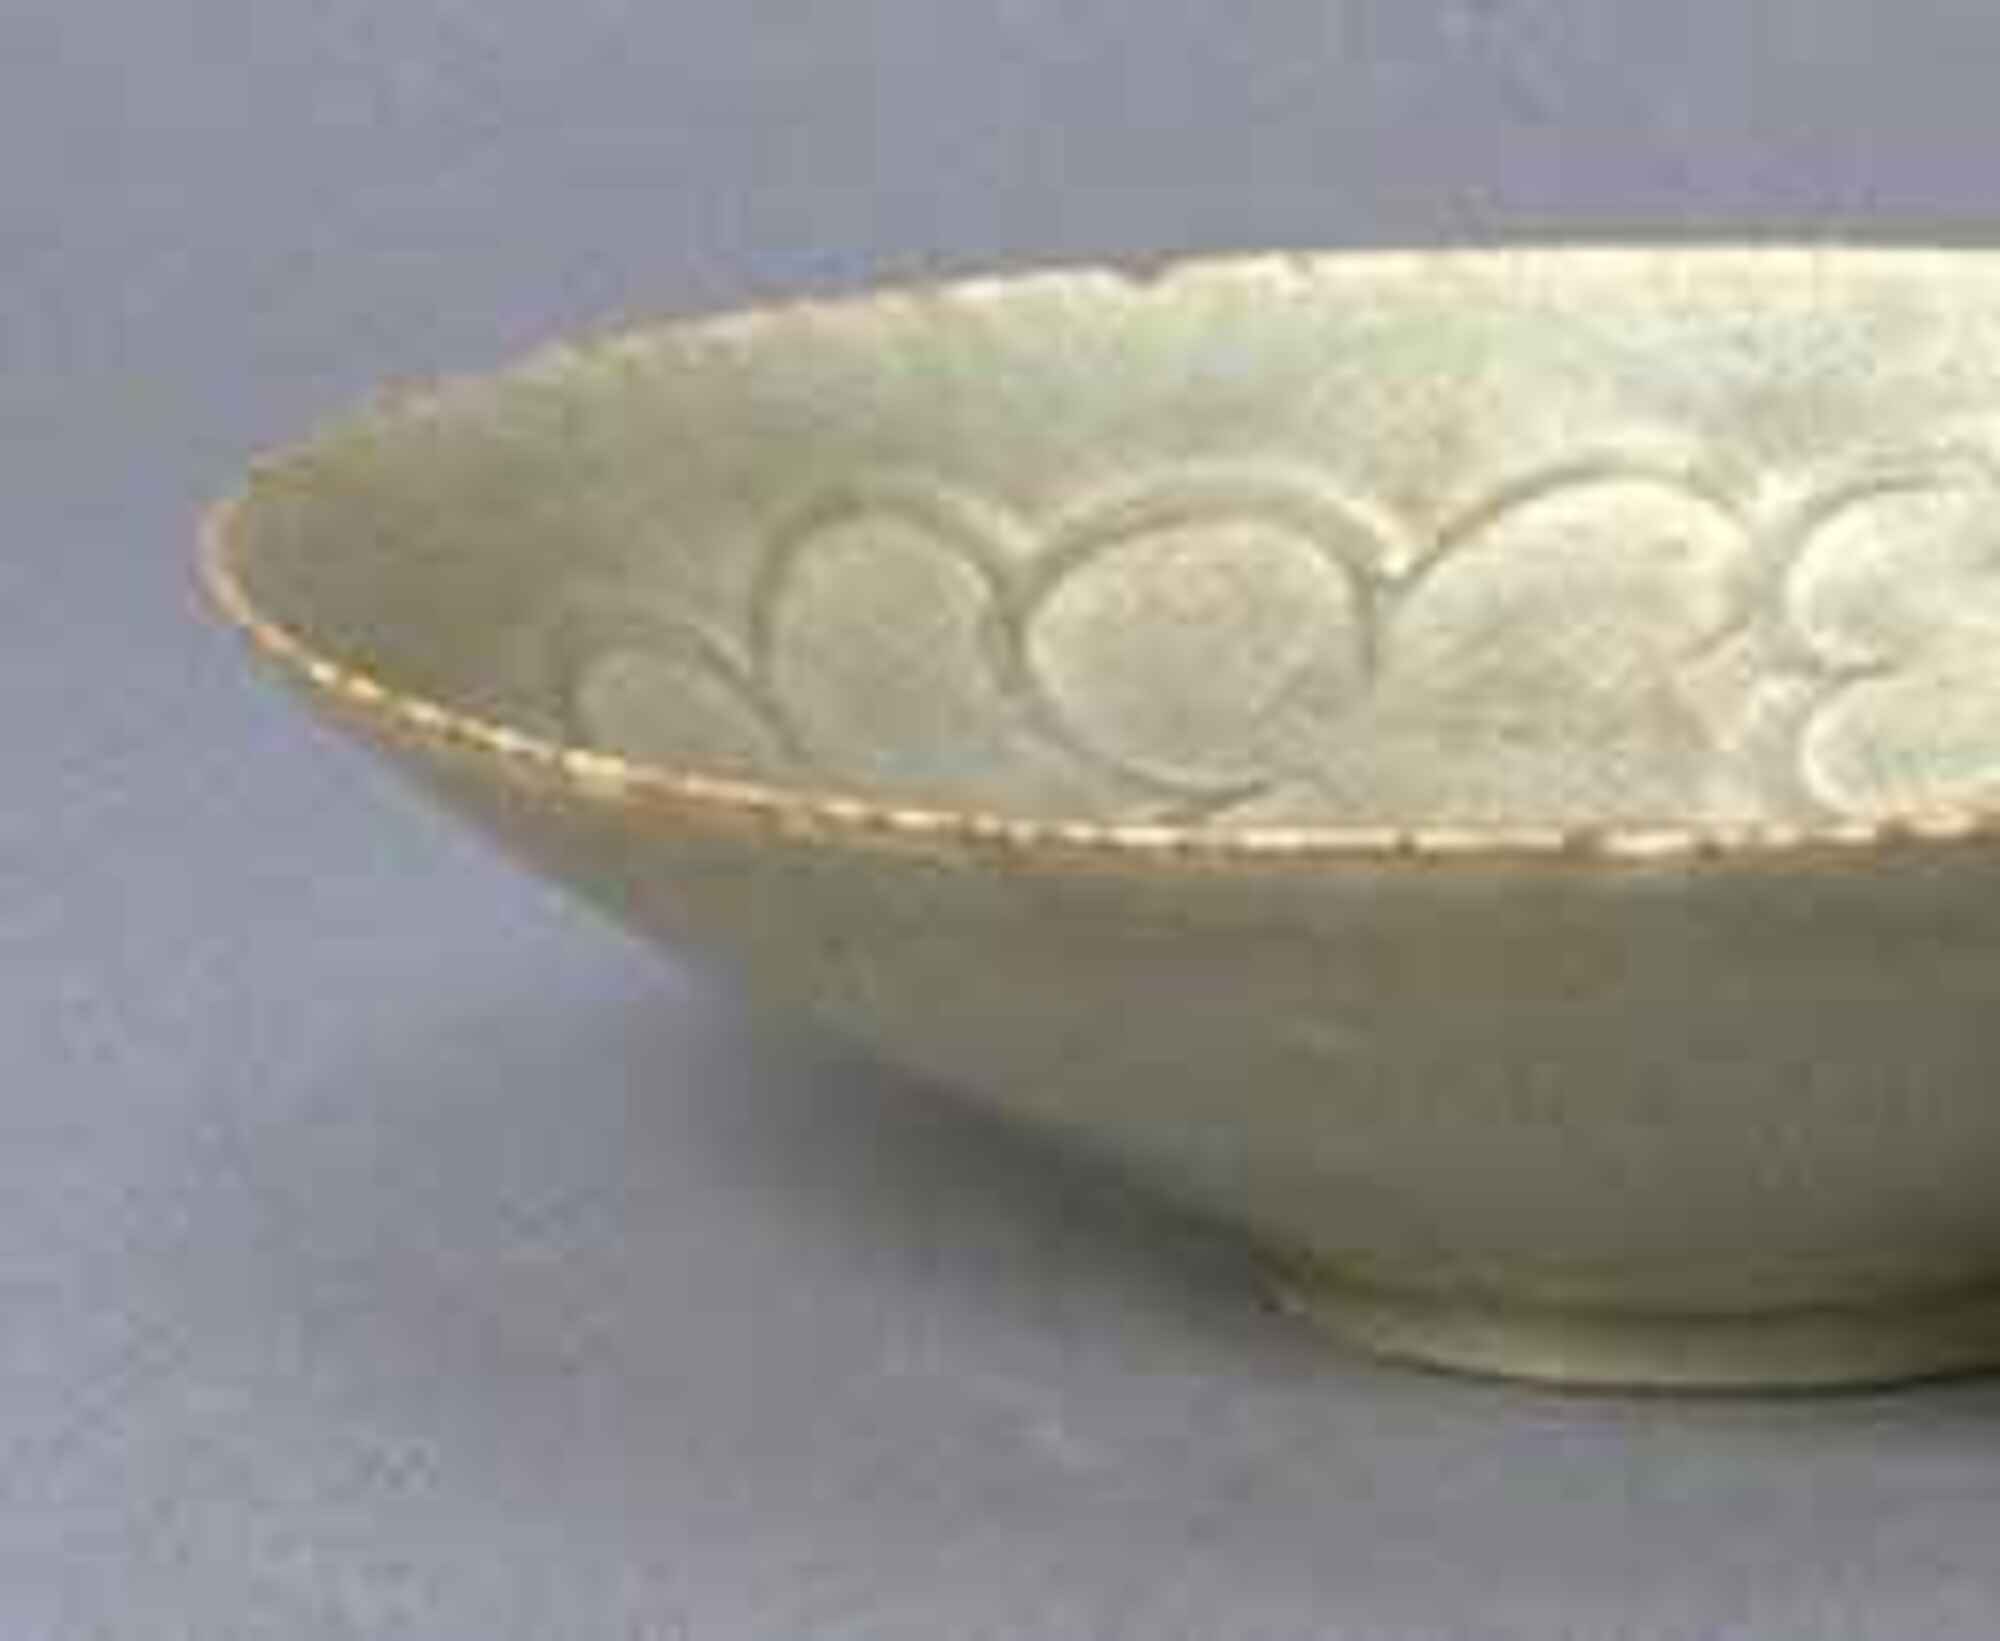 Thin porcelain conical bowl with direct rim on a footring. The interior has a molded, incised cloud decoration, and is covered in a white glaze with bluish tinge.